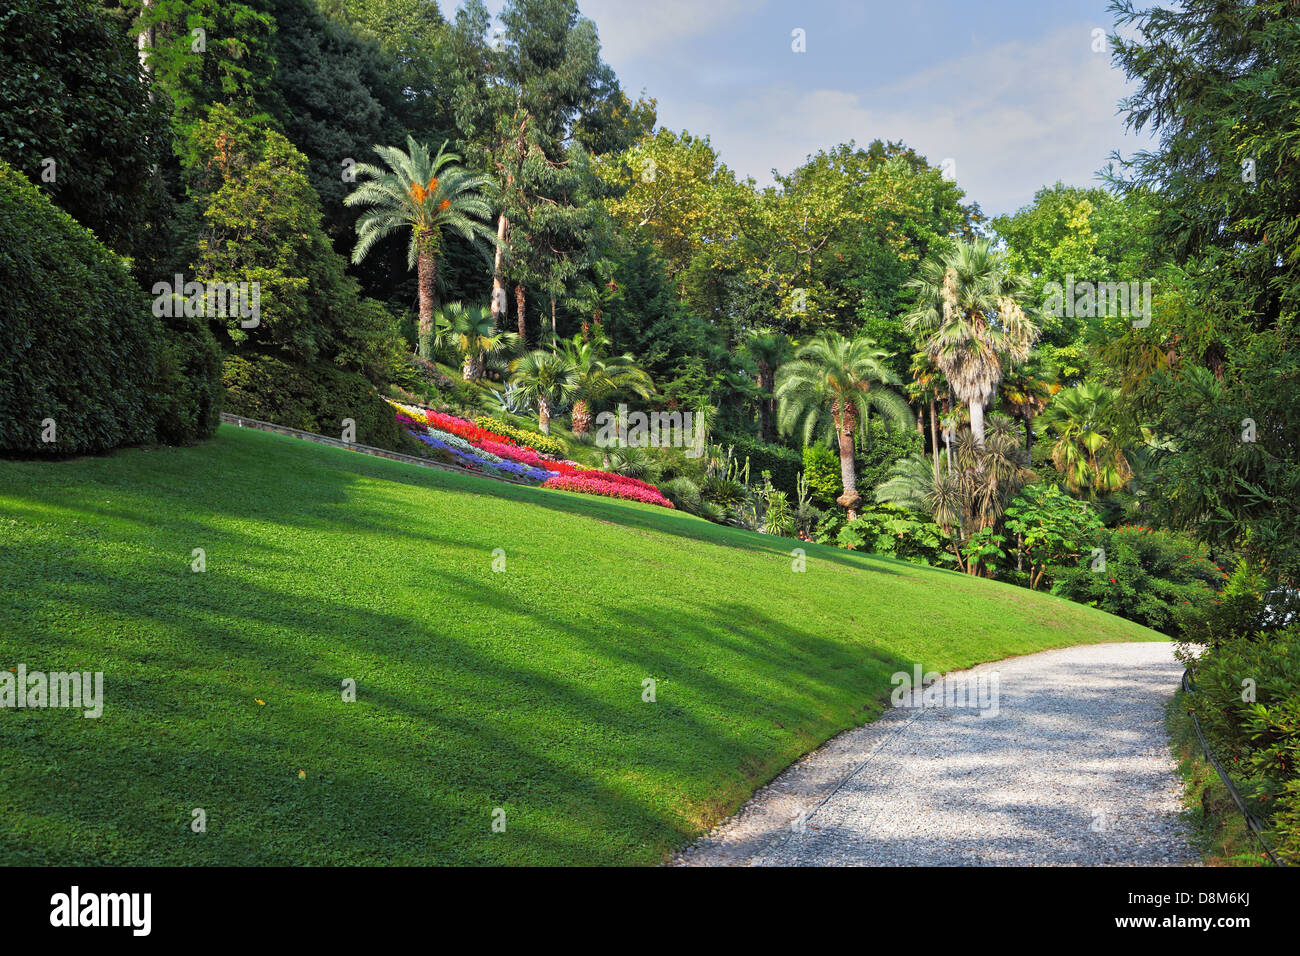 The flowerbeds, lawn and path Stock Photo